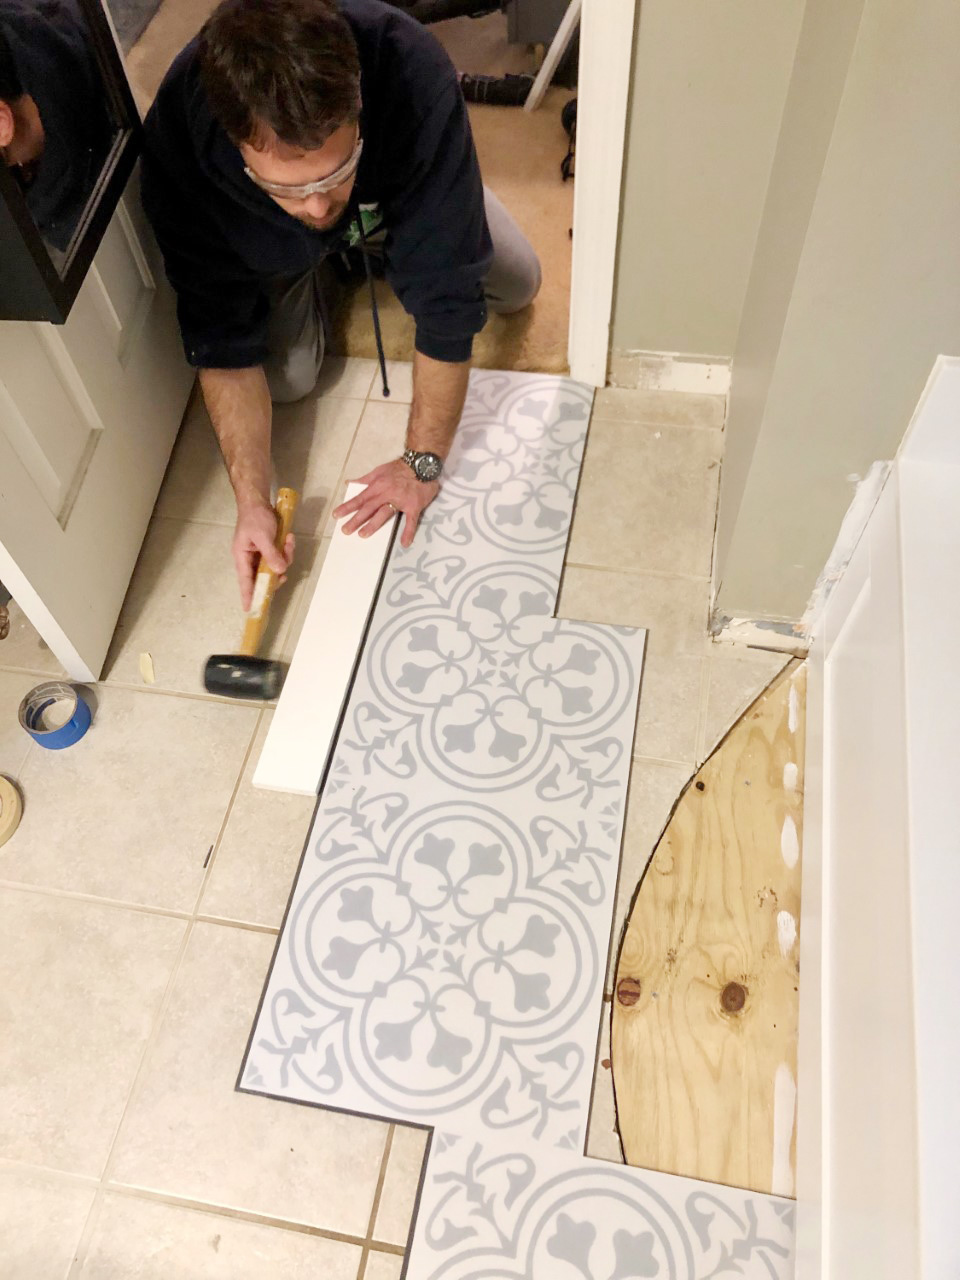 Lvt Flooring Over Existing Tile The, How To Tile A Bathroom Floor Over Plywood